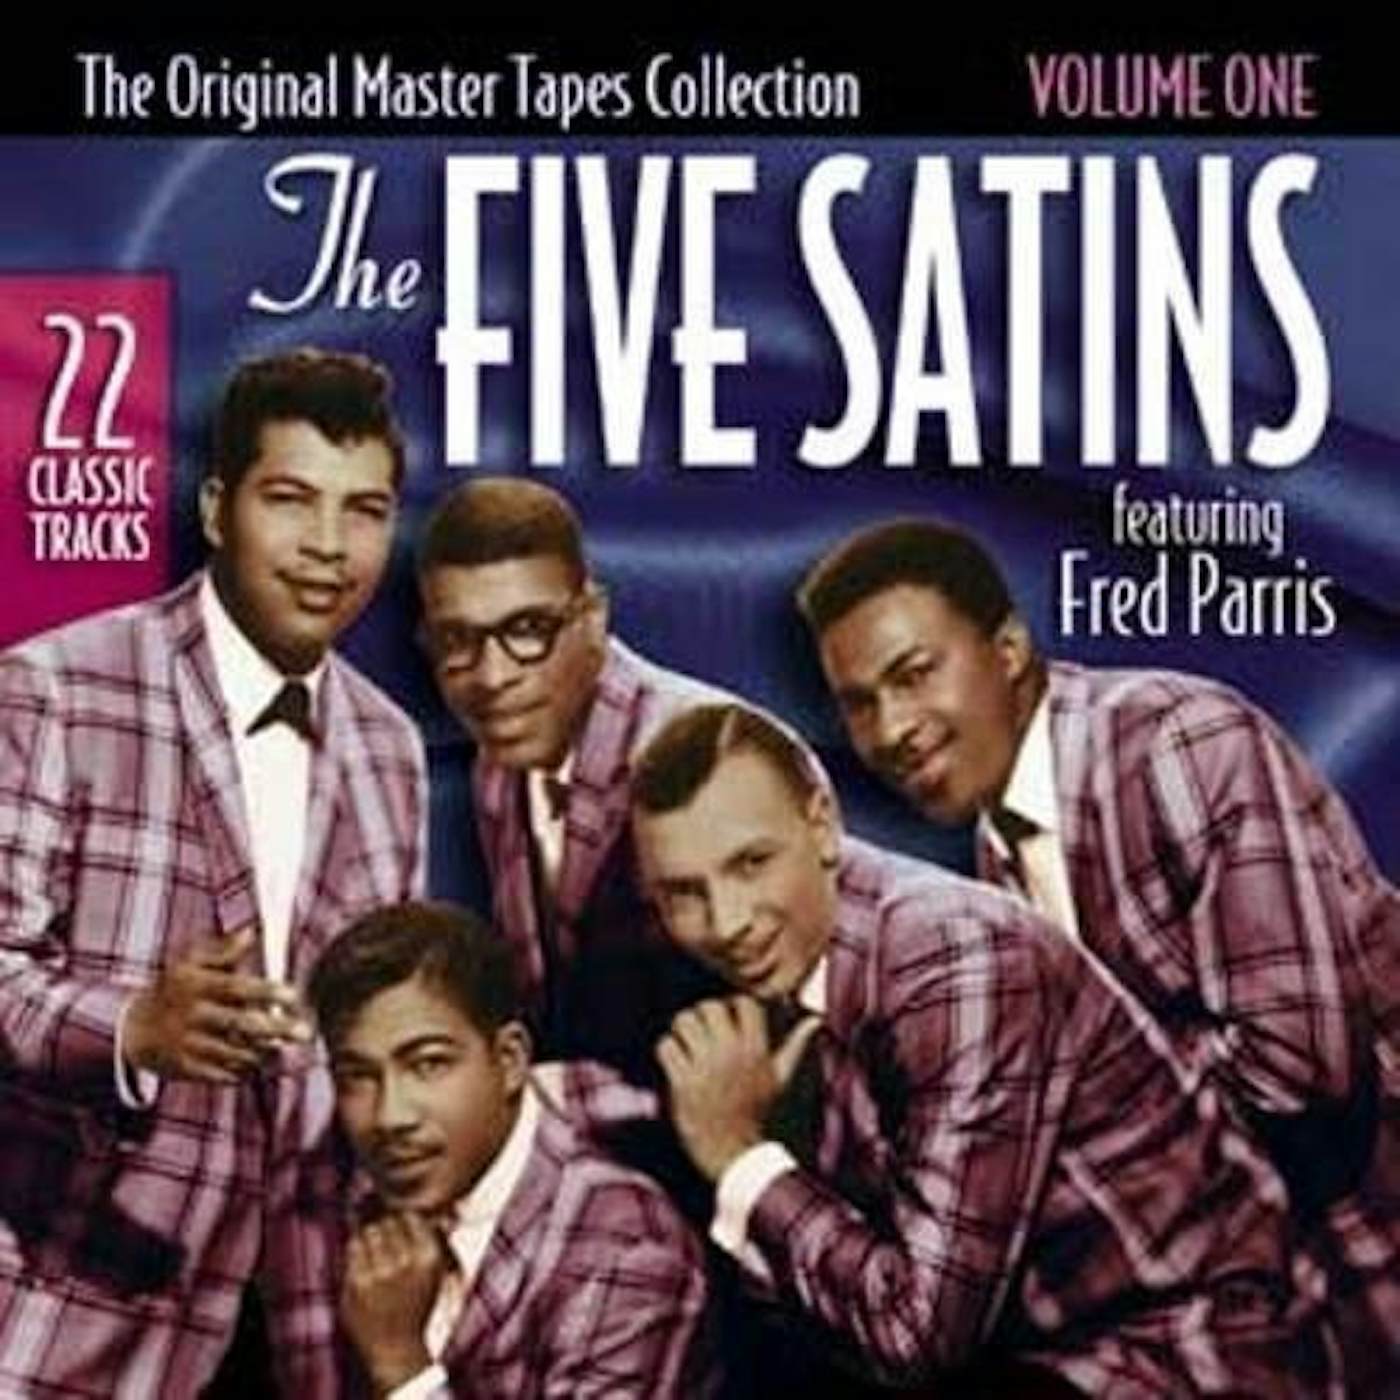 The Five Satins ORIGINAL MASTER TAPES COLLECTION 1 CD